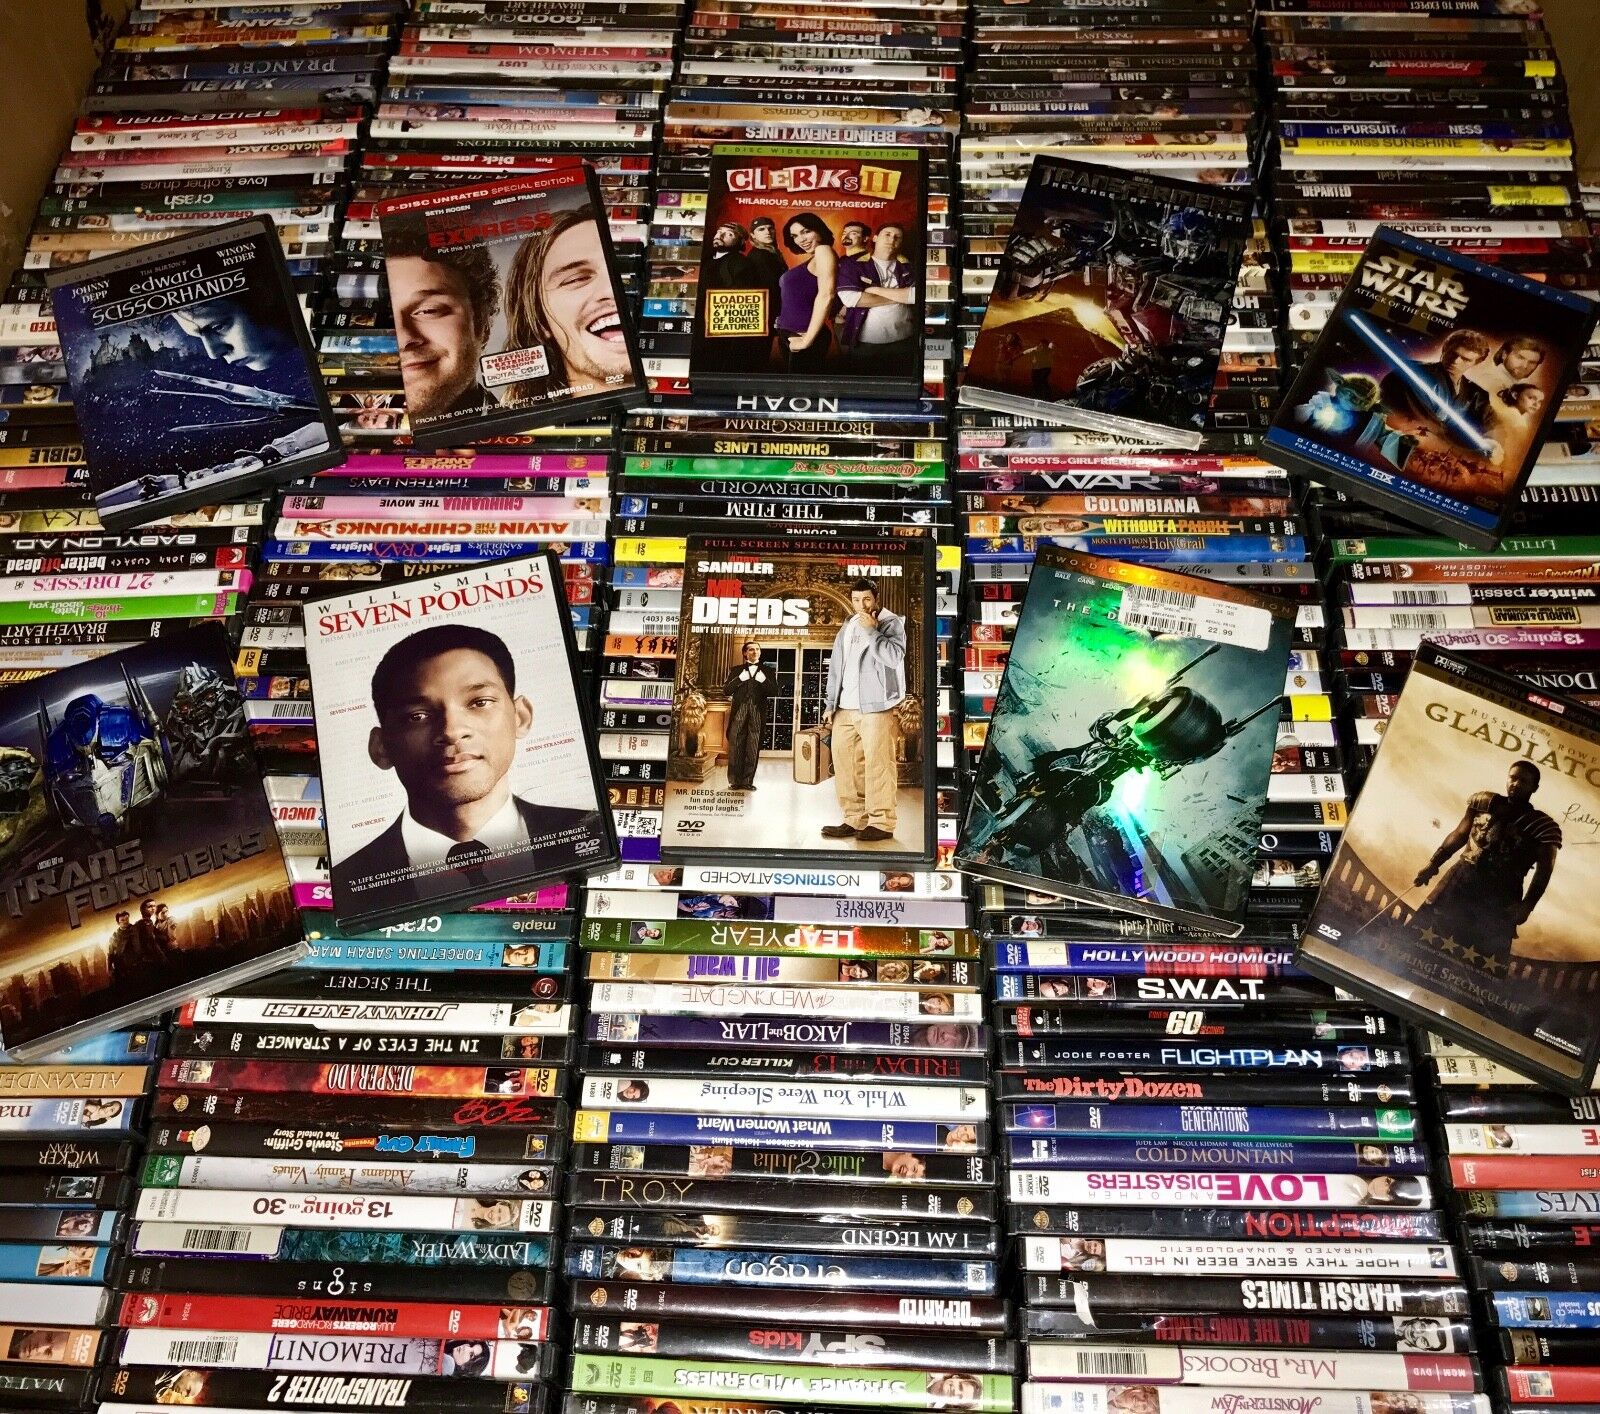 100 DVD Movies Assorted Wholesale Lot Bulk Used DVDs 100 ALL MOVIES $1.5K MSRP